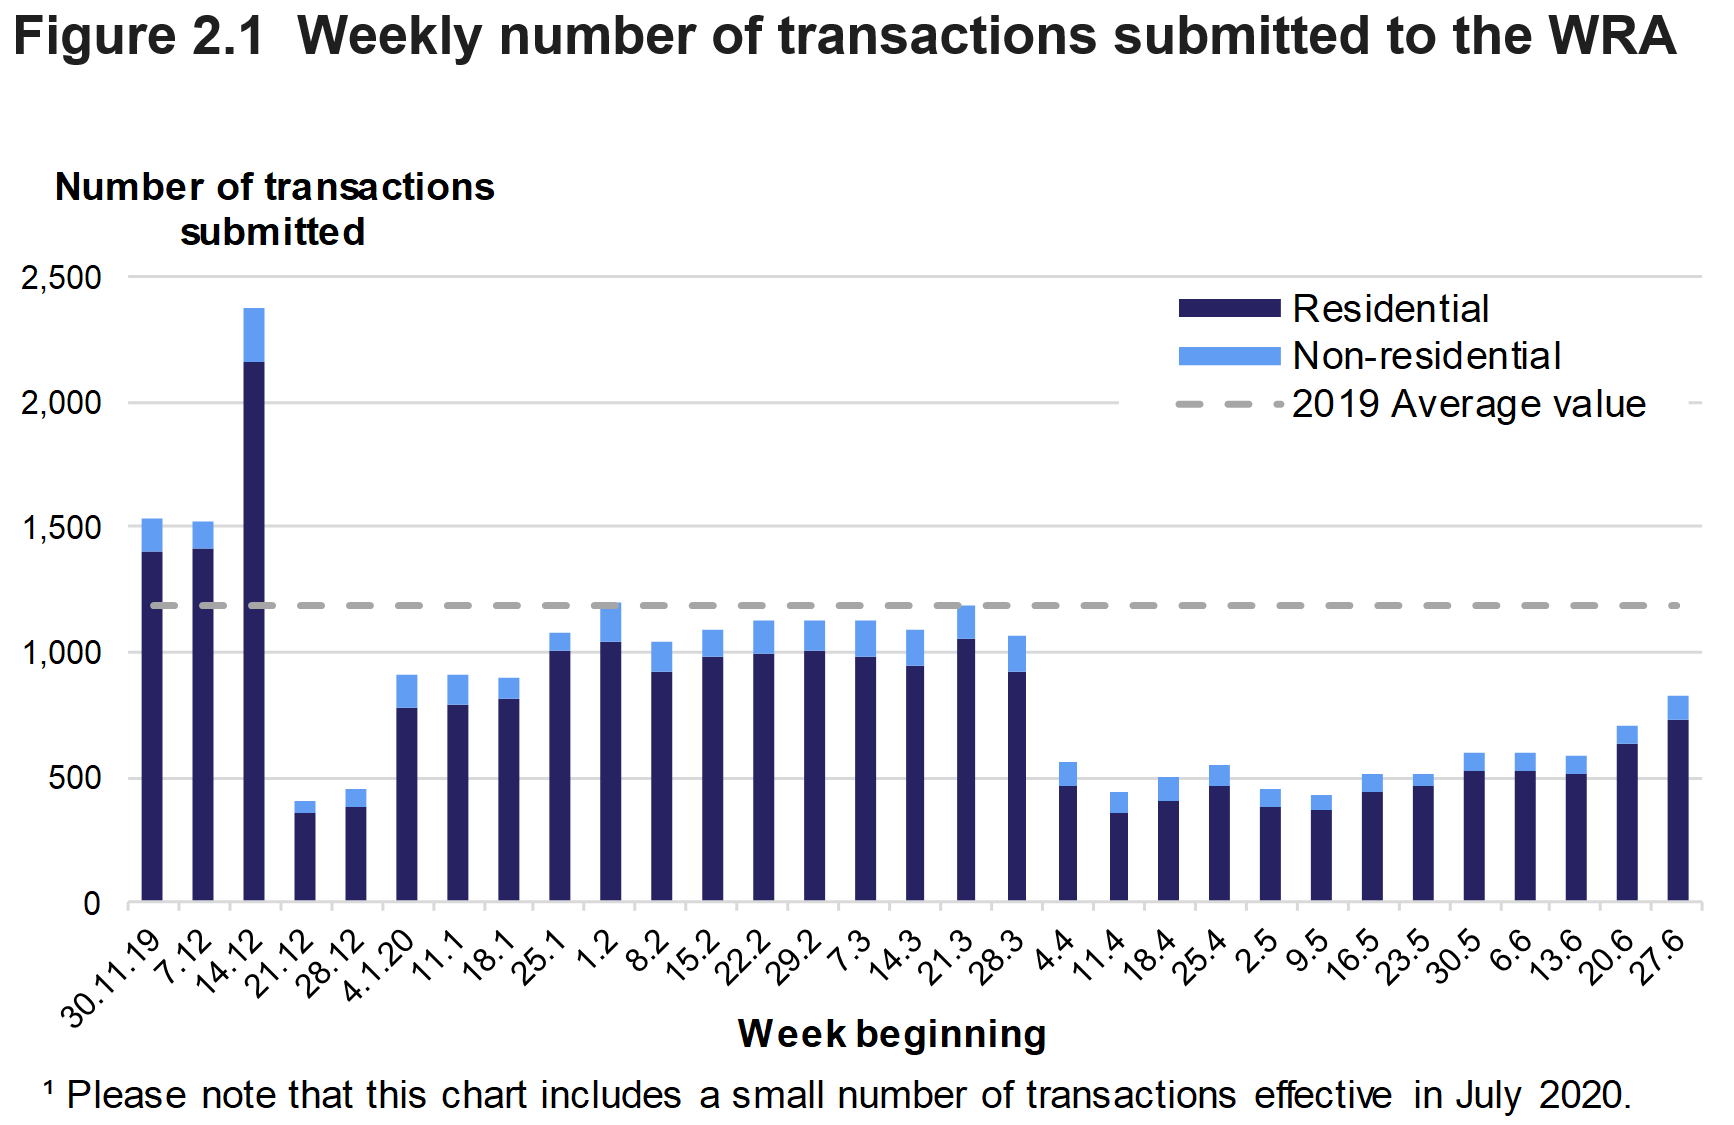 Figure 2.1 shows the number of residential and non-residential transactions submitted to the WRA each week from December 2019 to June 2020. Please note that this chart includes a small number of transactions effective in July 2020.